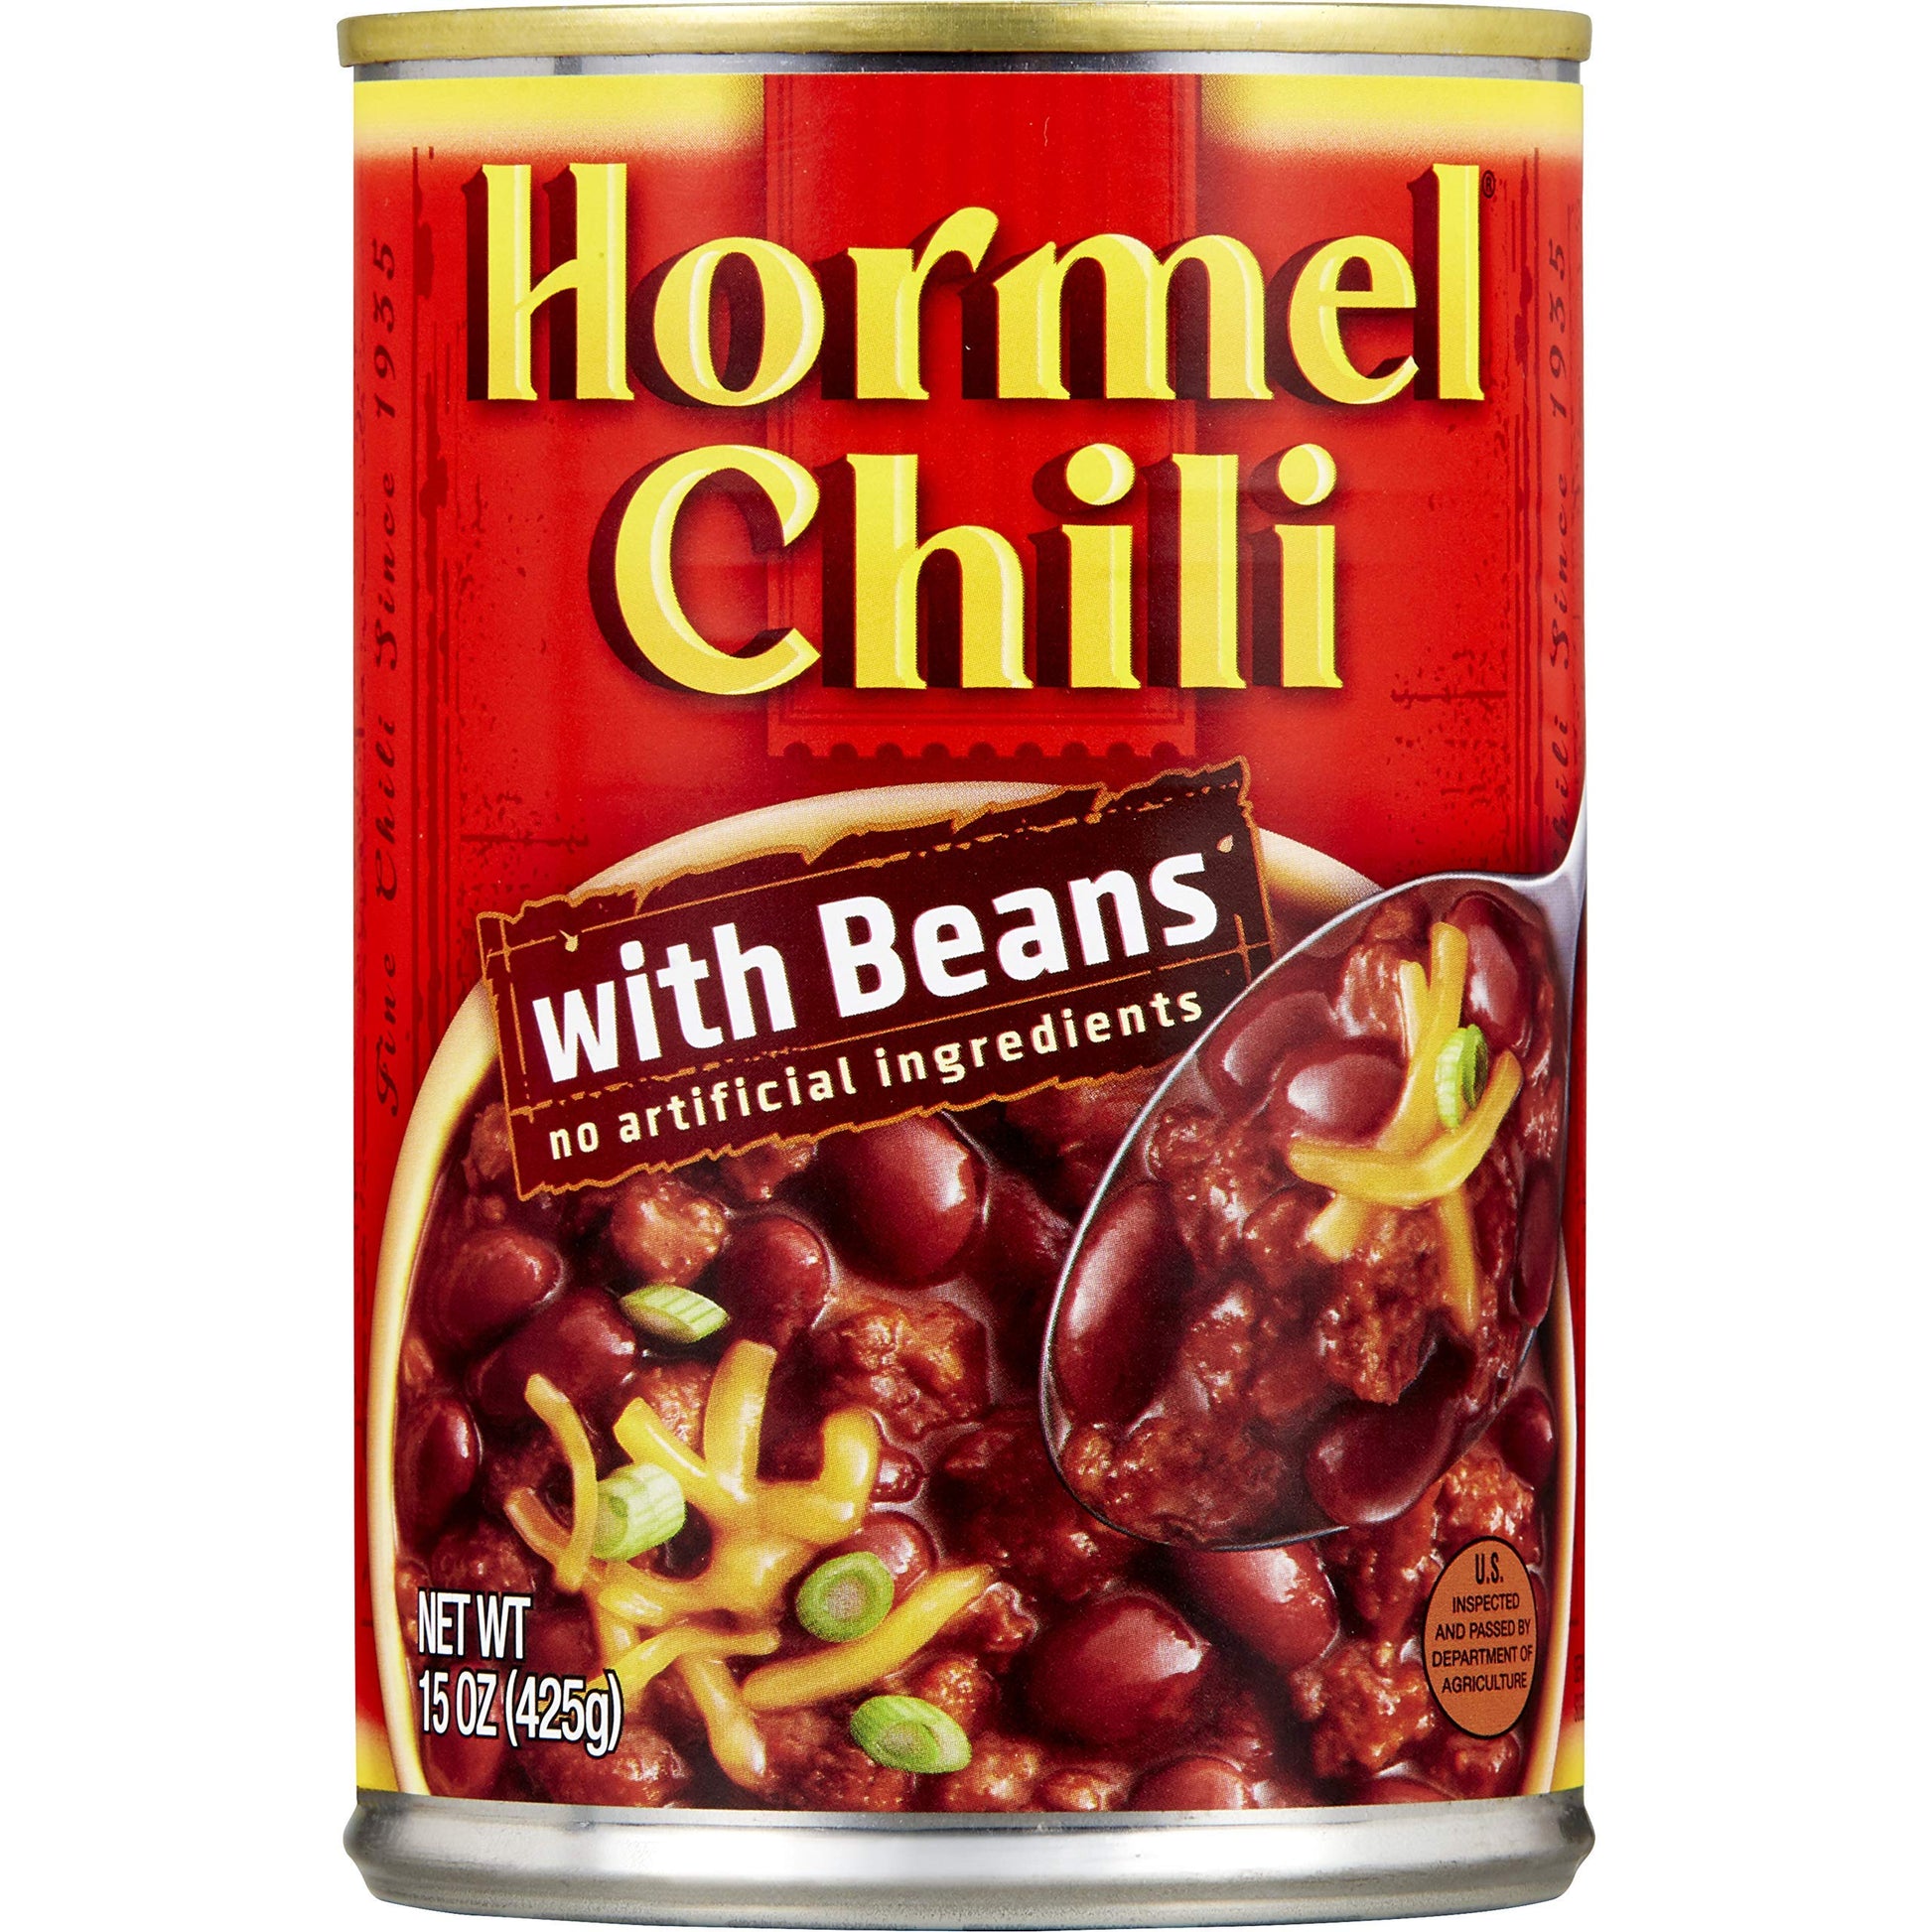 Hormel Chili with Beans 15oz 12 Count